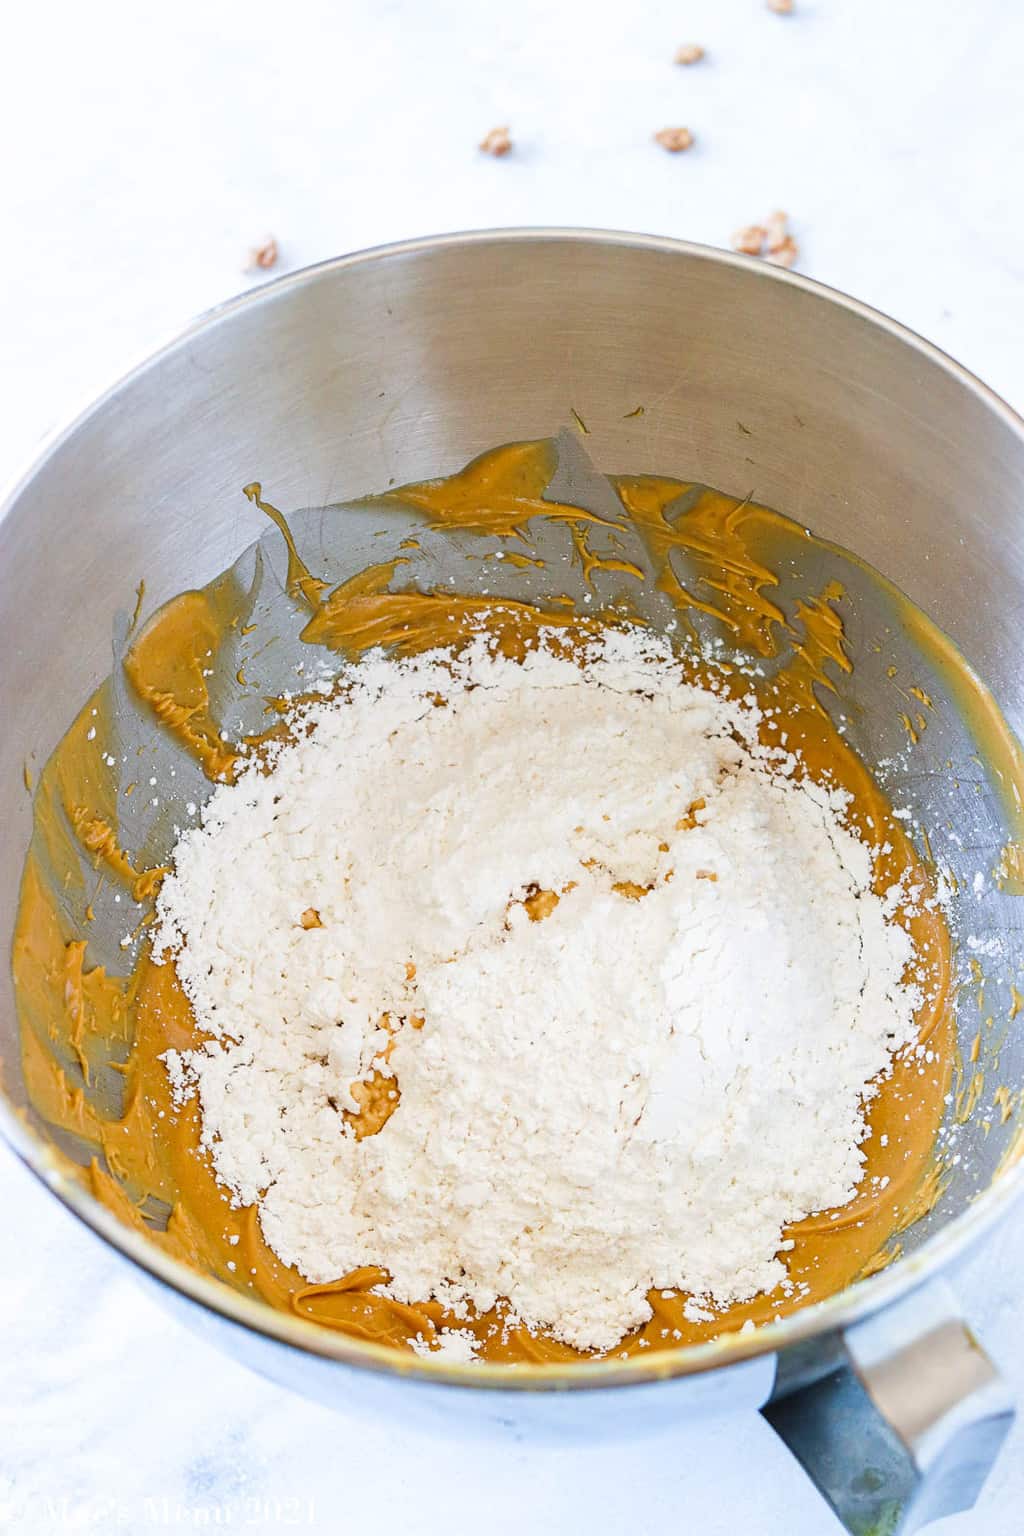 A mixing bowl of whipped peanut butter with confectioner's sugar